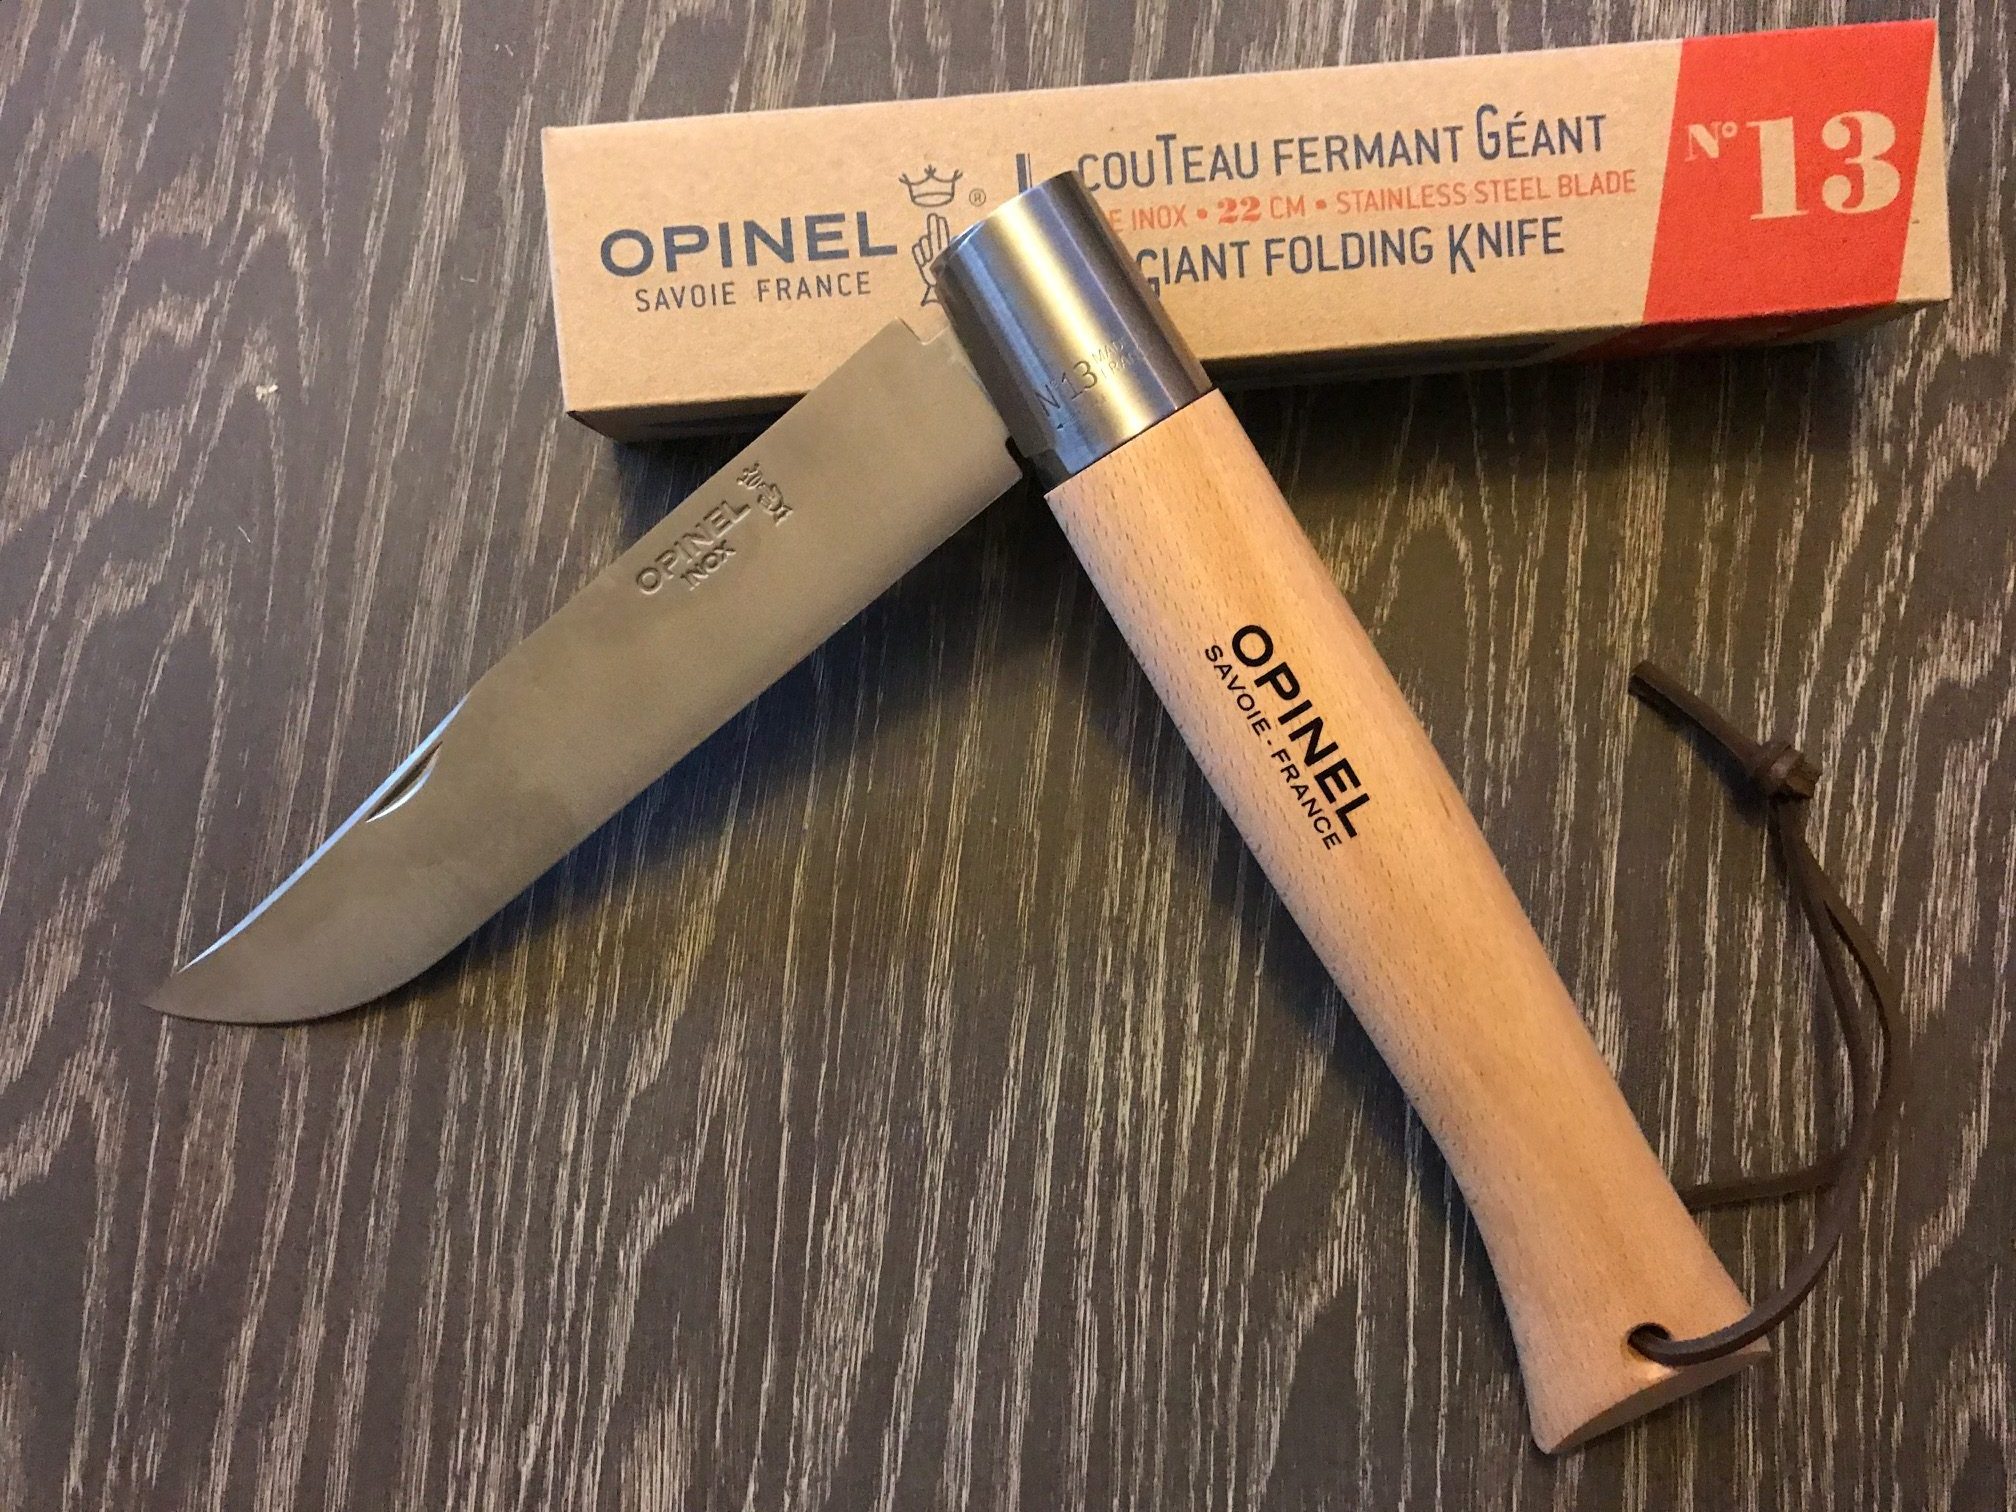 Giant Folding Pocket Knife Opinel 13 Collectibles Collectables Knives 1970s  Length 50.5 Cm 